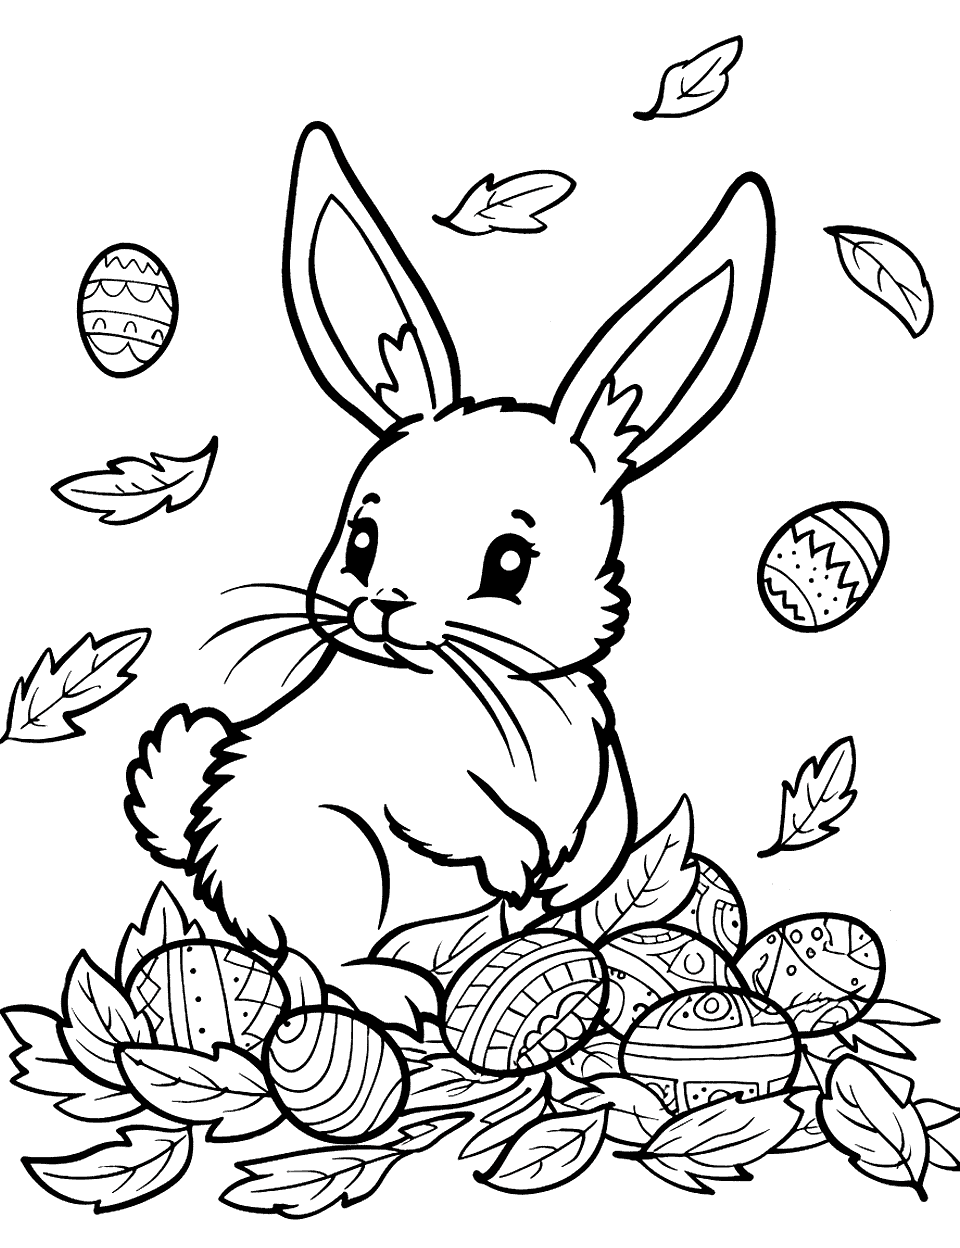 Autumn Leaves and Easter Eggs Bunny Coloring Page - A bunny playing in a pile of autumn leaves, with hidden Easter eggs among the leaves.